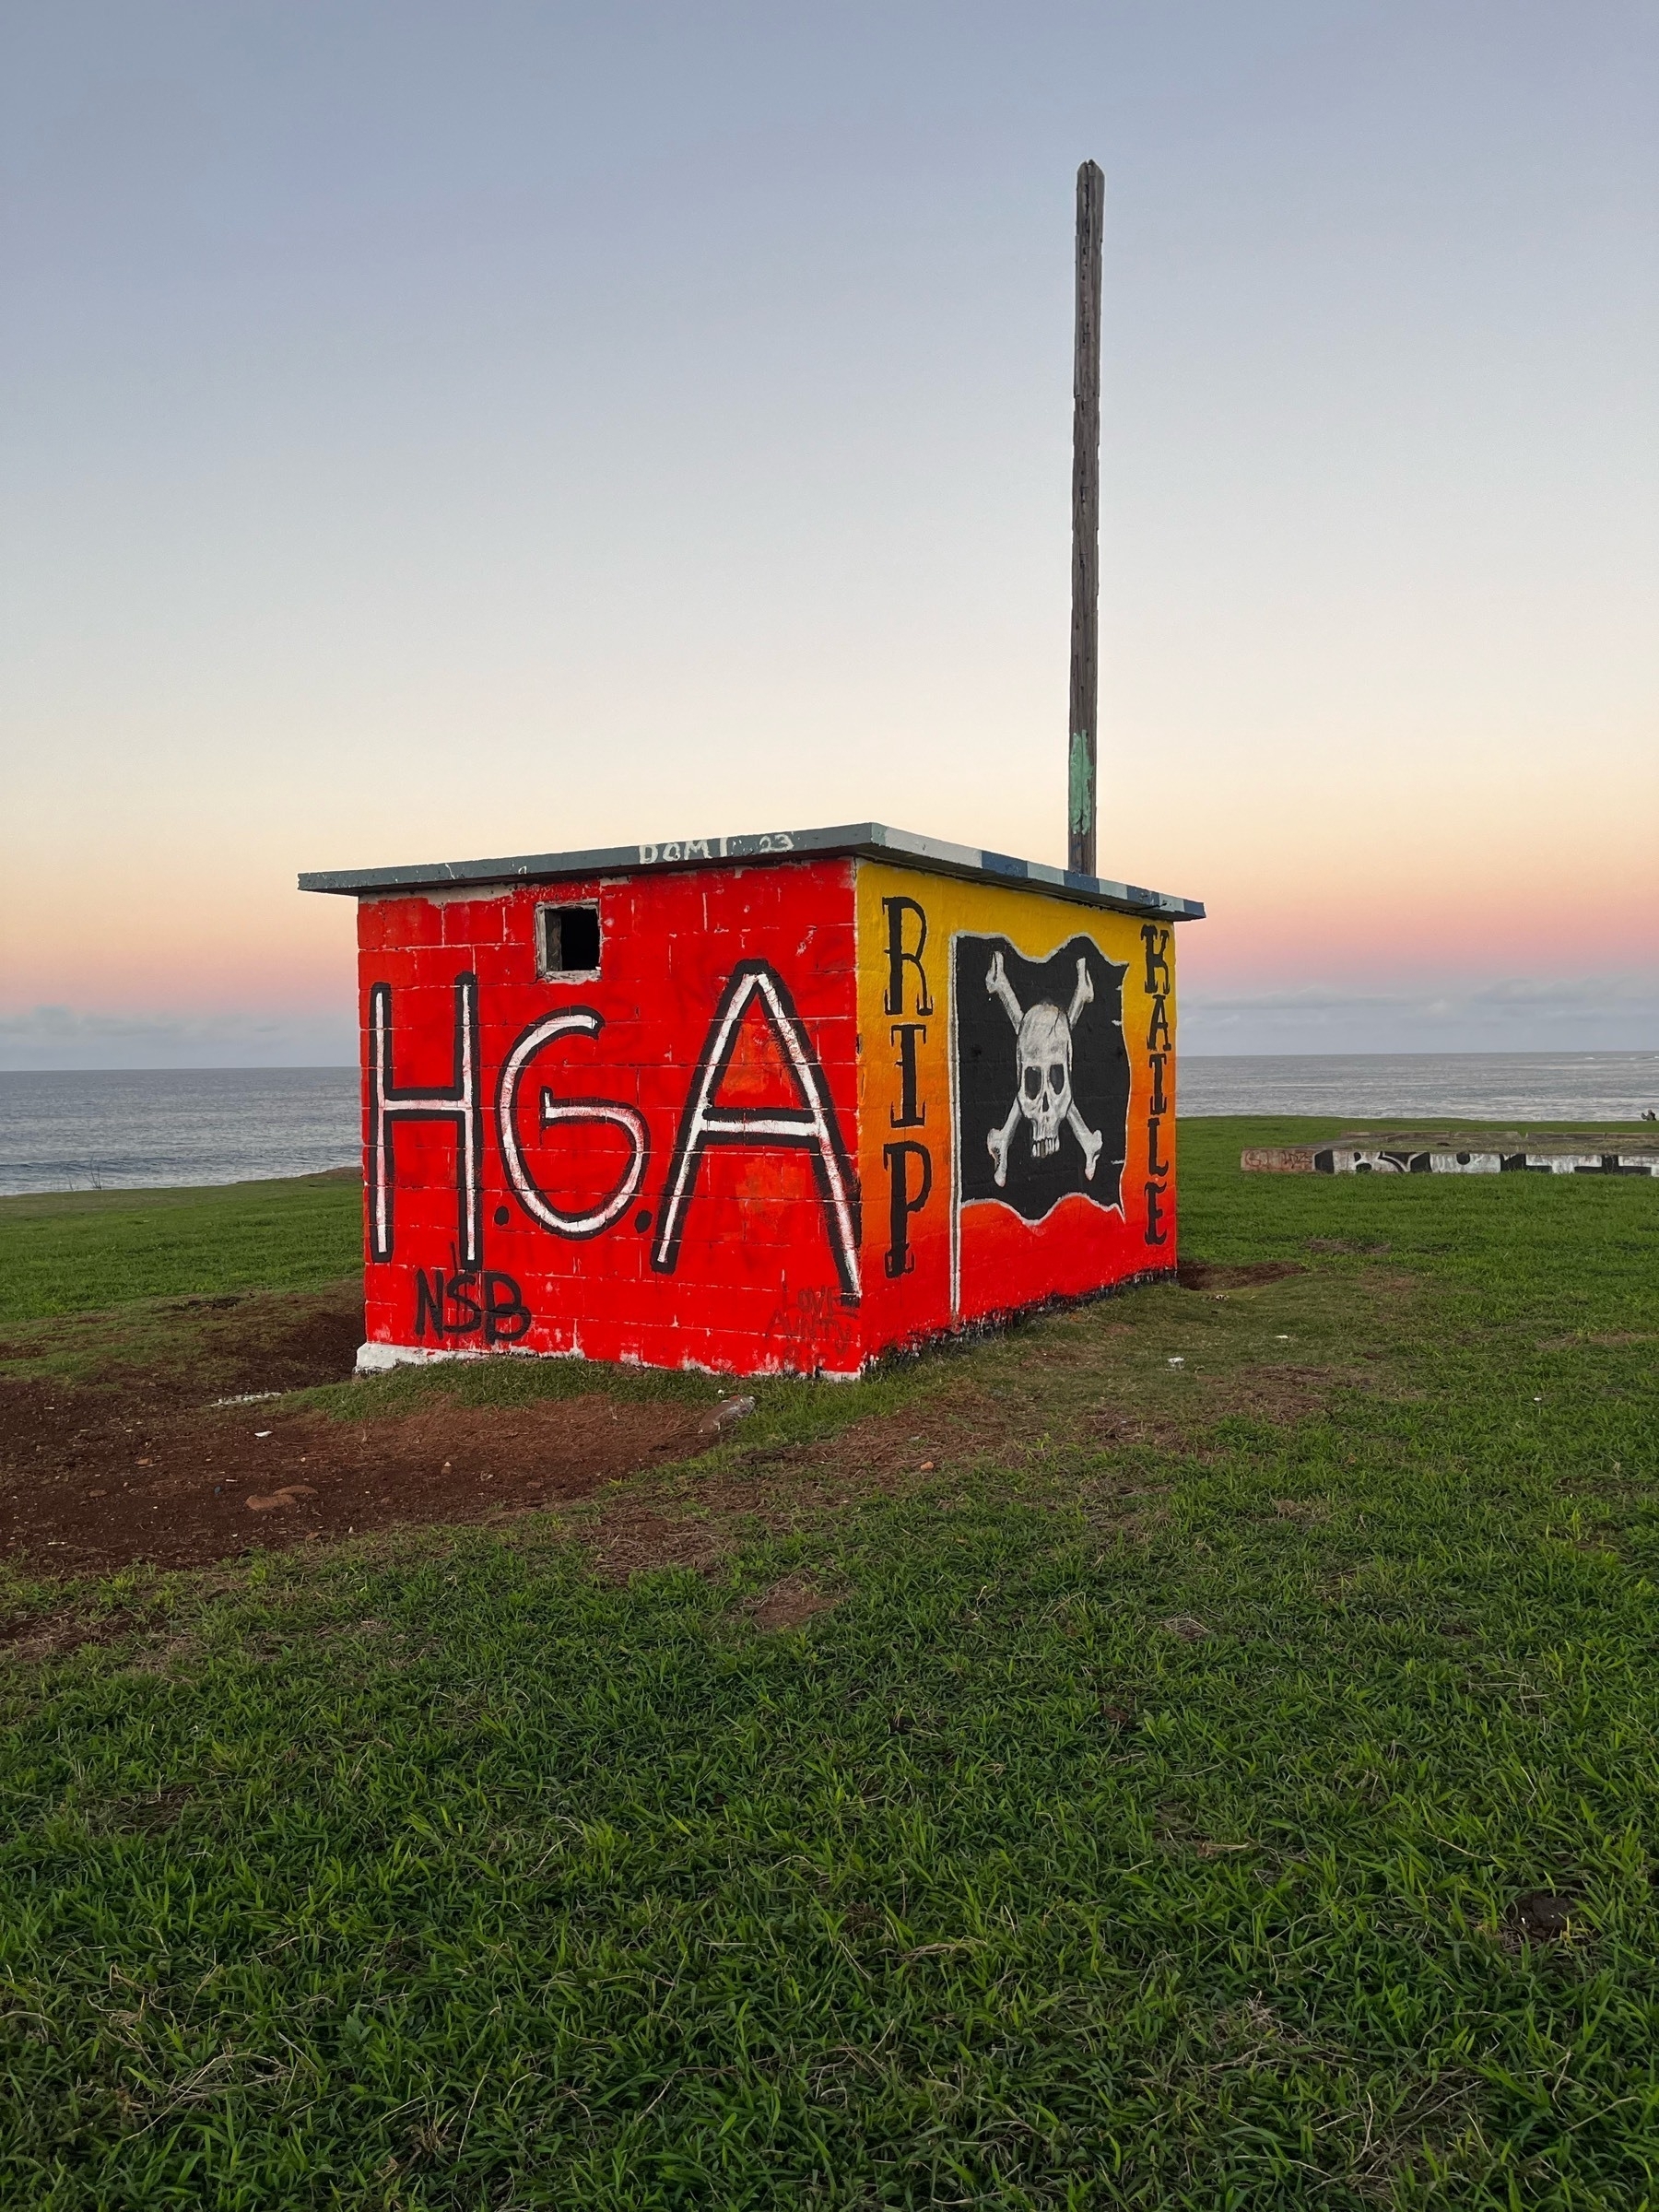 Small red graffiti-covered concrete building with a tall pole on top, set against a coastal landscape with grass in the foreground and a sunset sky in the background.